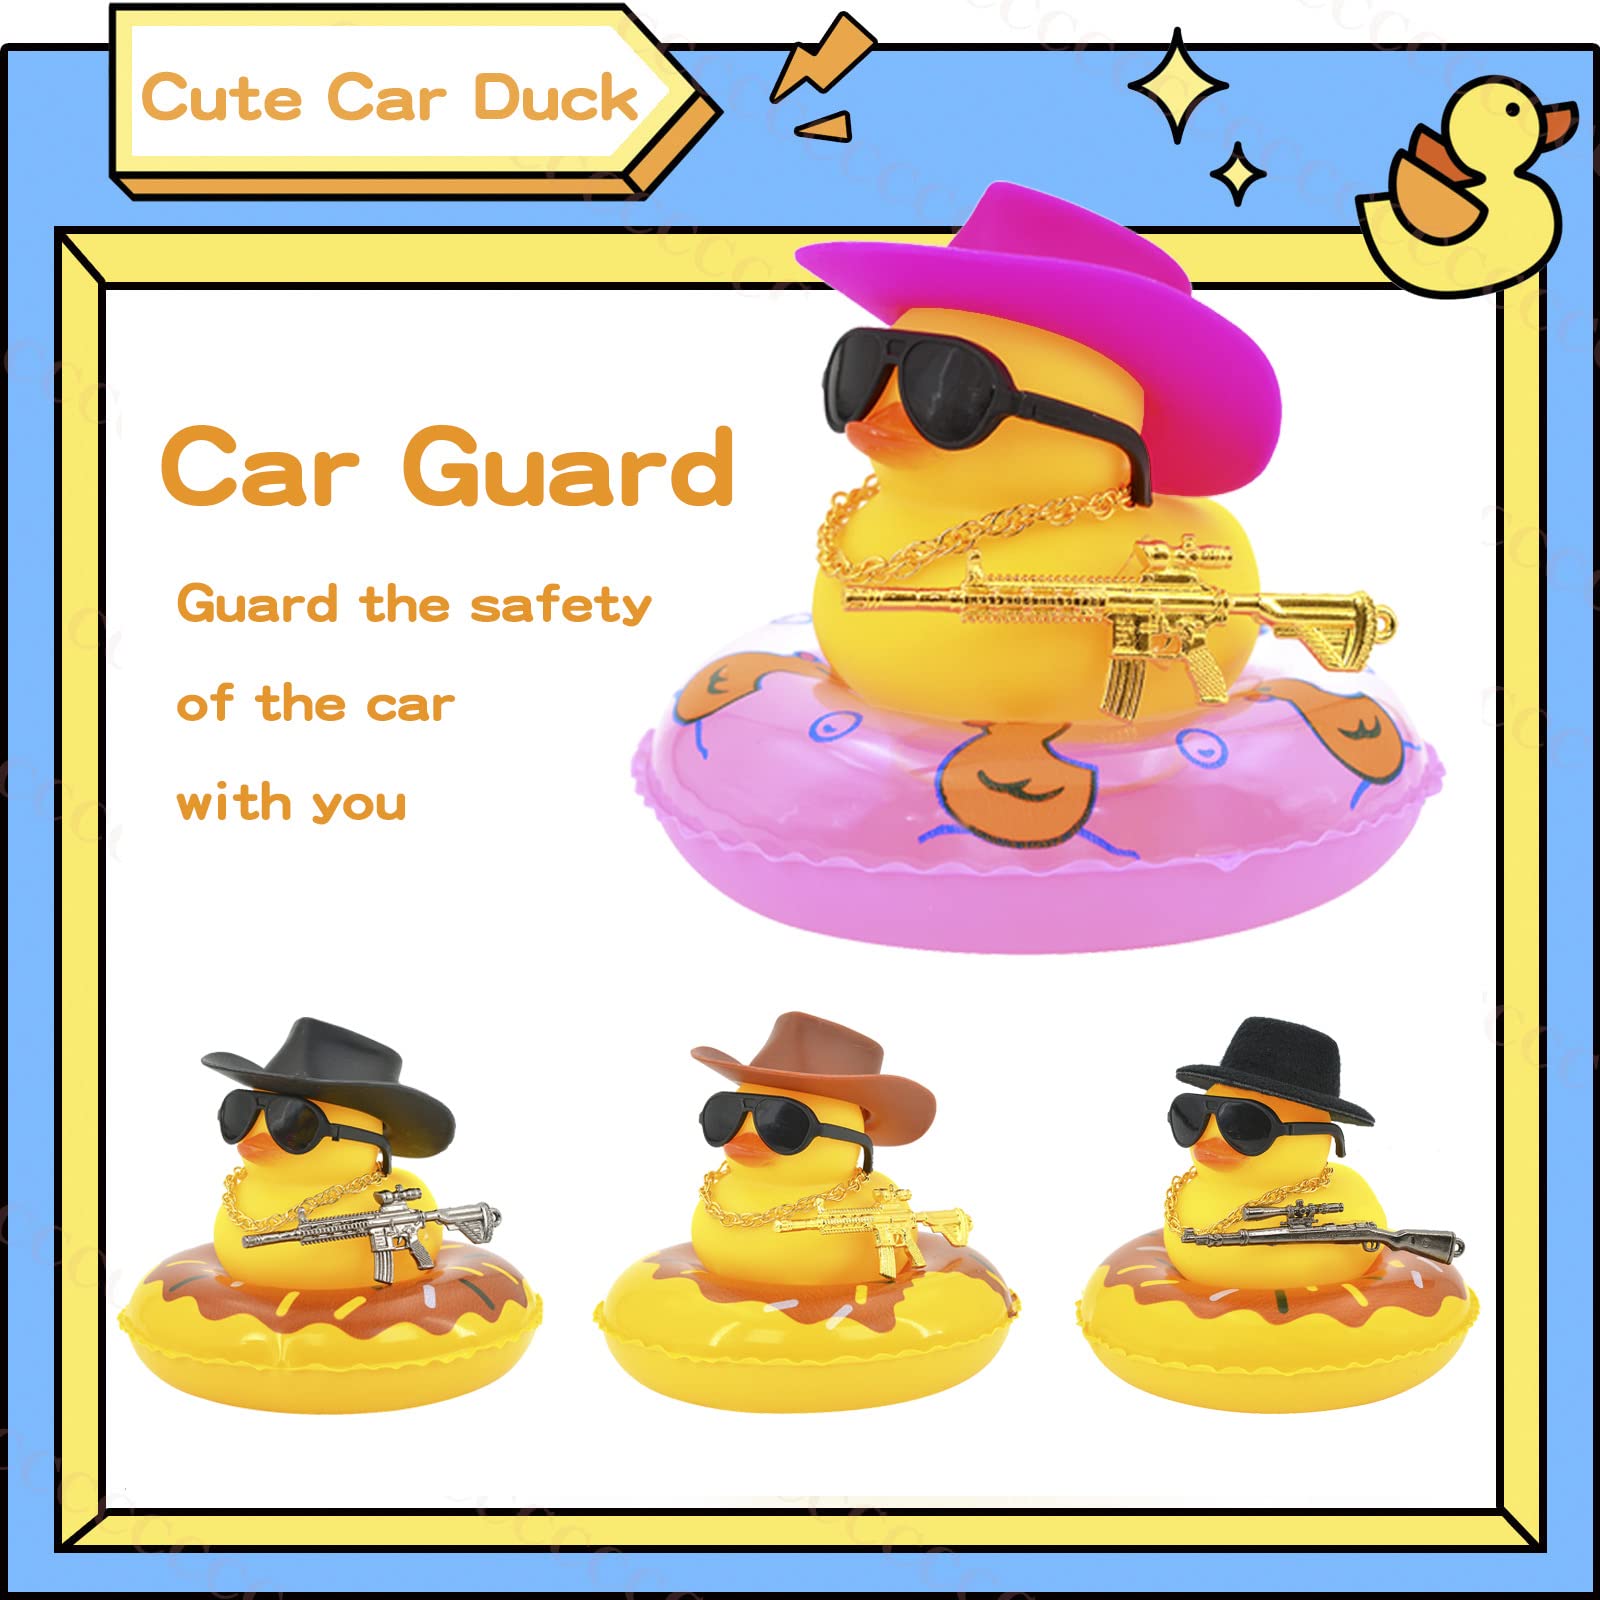 Car Duck Decoration Dashboard - Rubber Duck Toy Car Ornament, Car Accessories Duck with Mini Sun Hat Swim Ring Necklace and Sunglasses for Party Favors, Birthdays, Bath Time, Blue Sun Hat